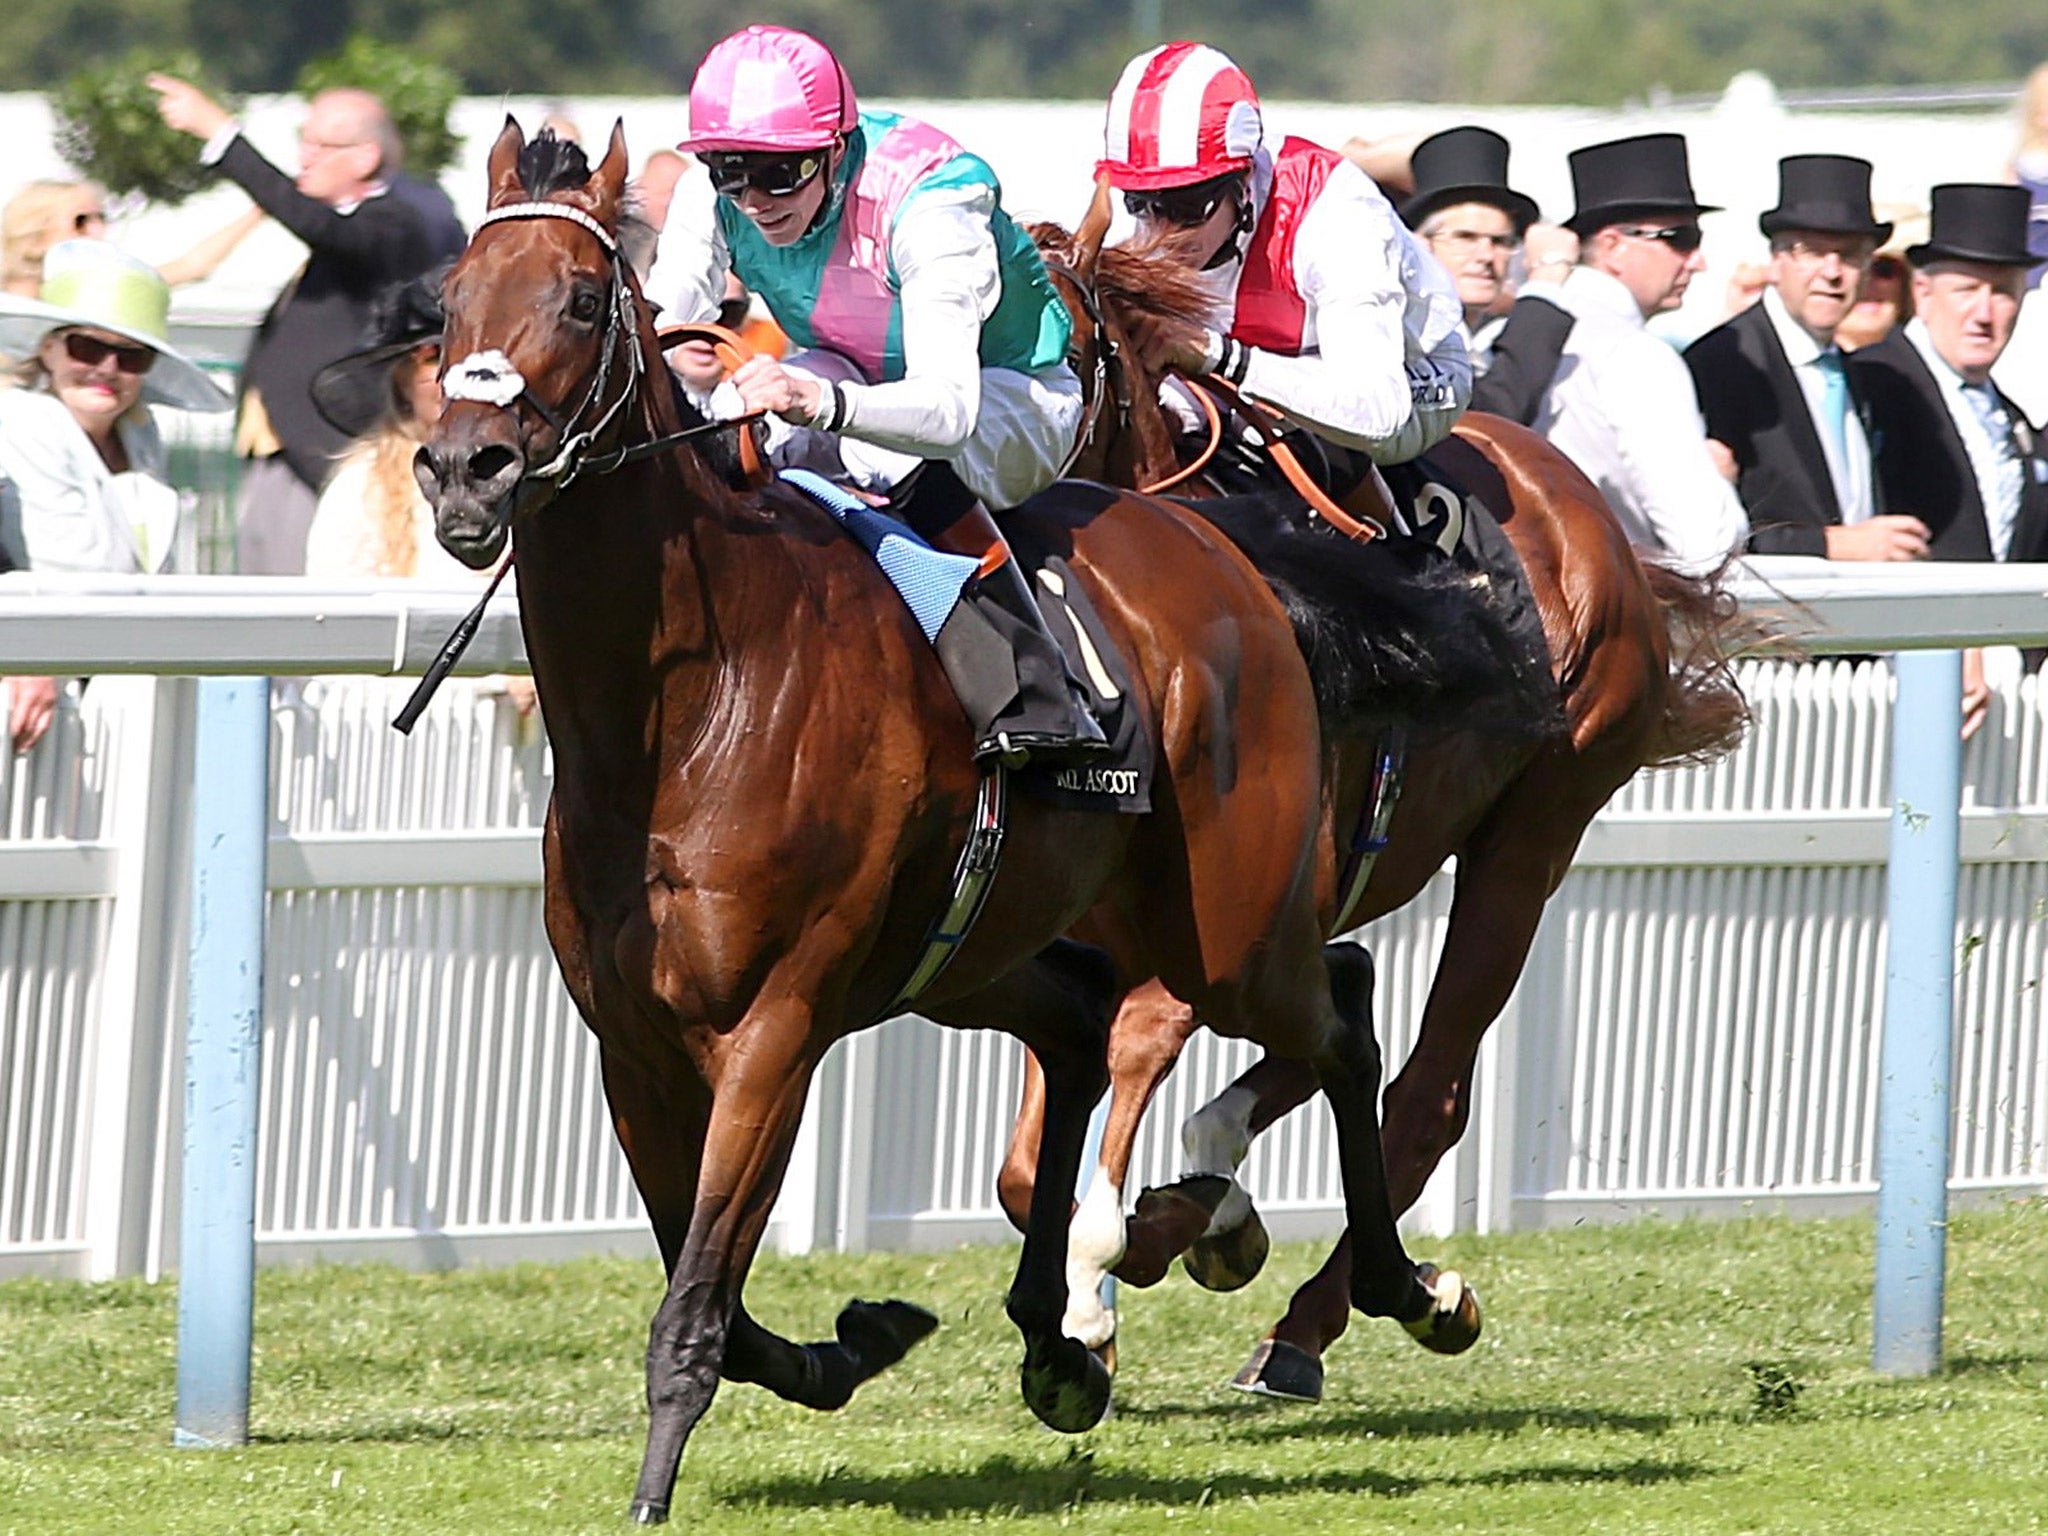 Kingman and jockey James Doyle storm to victory in the St James’s Palace Stakes at Royal Ascot